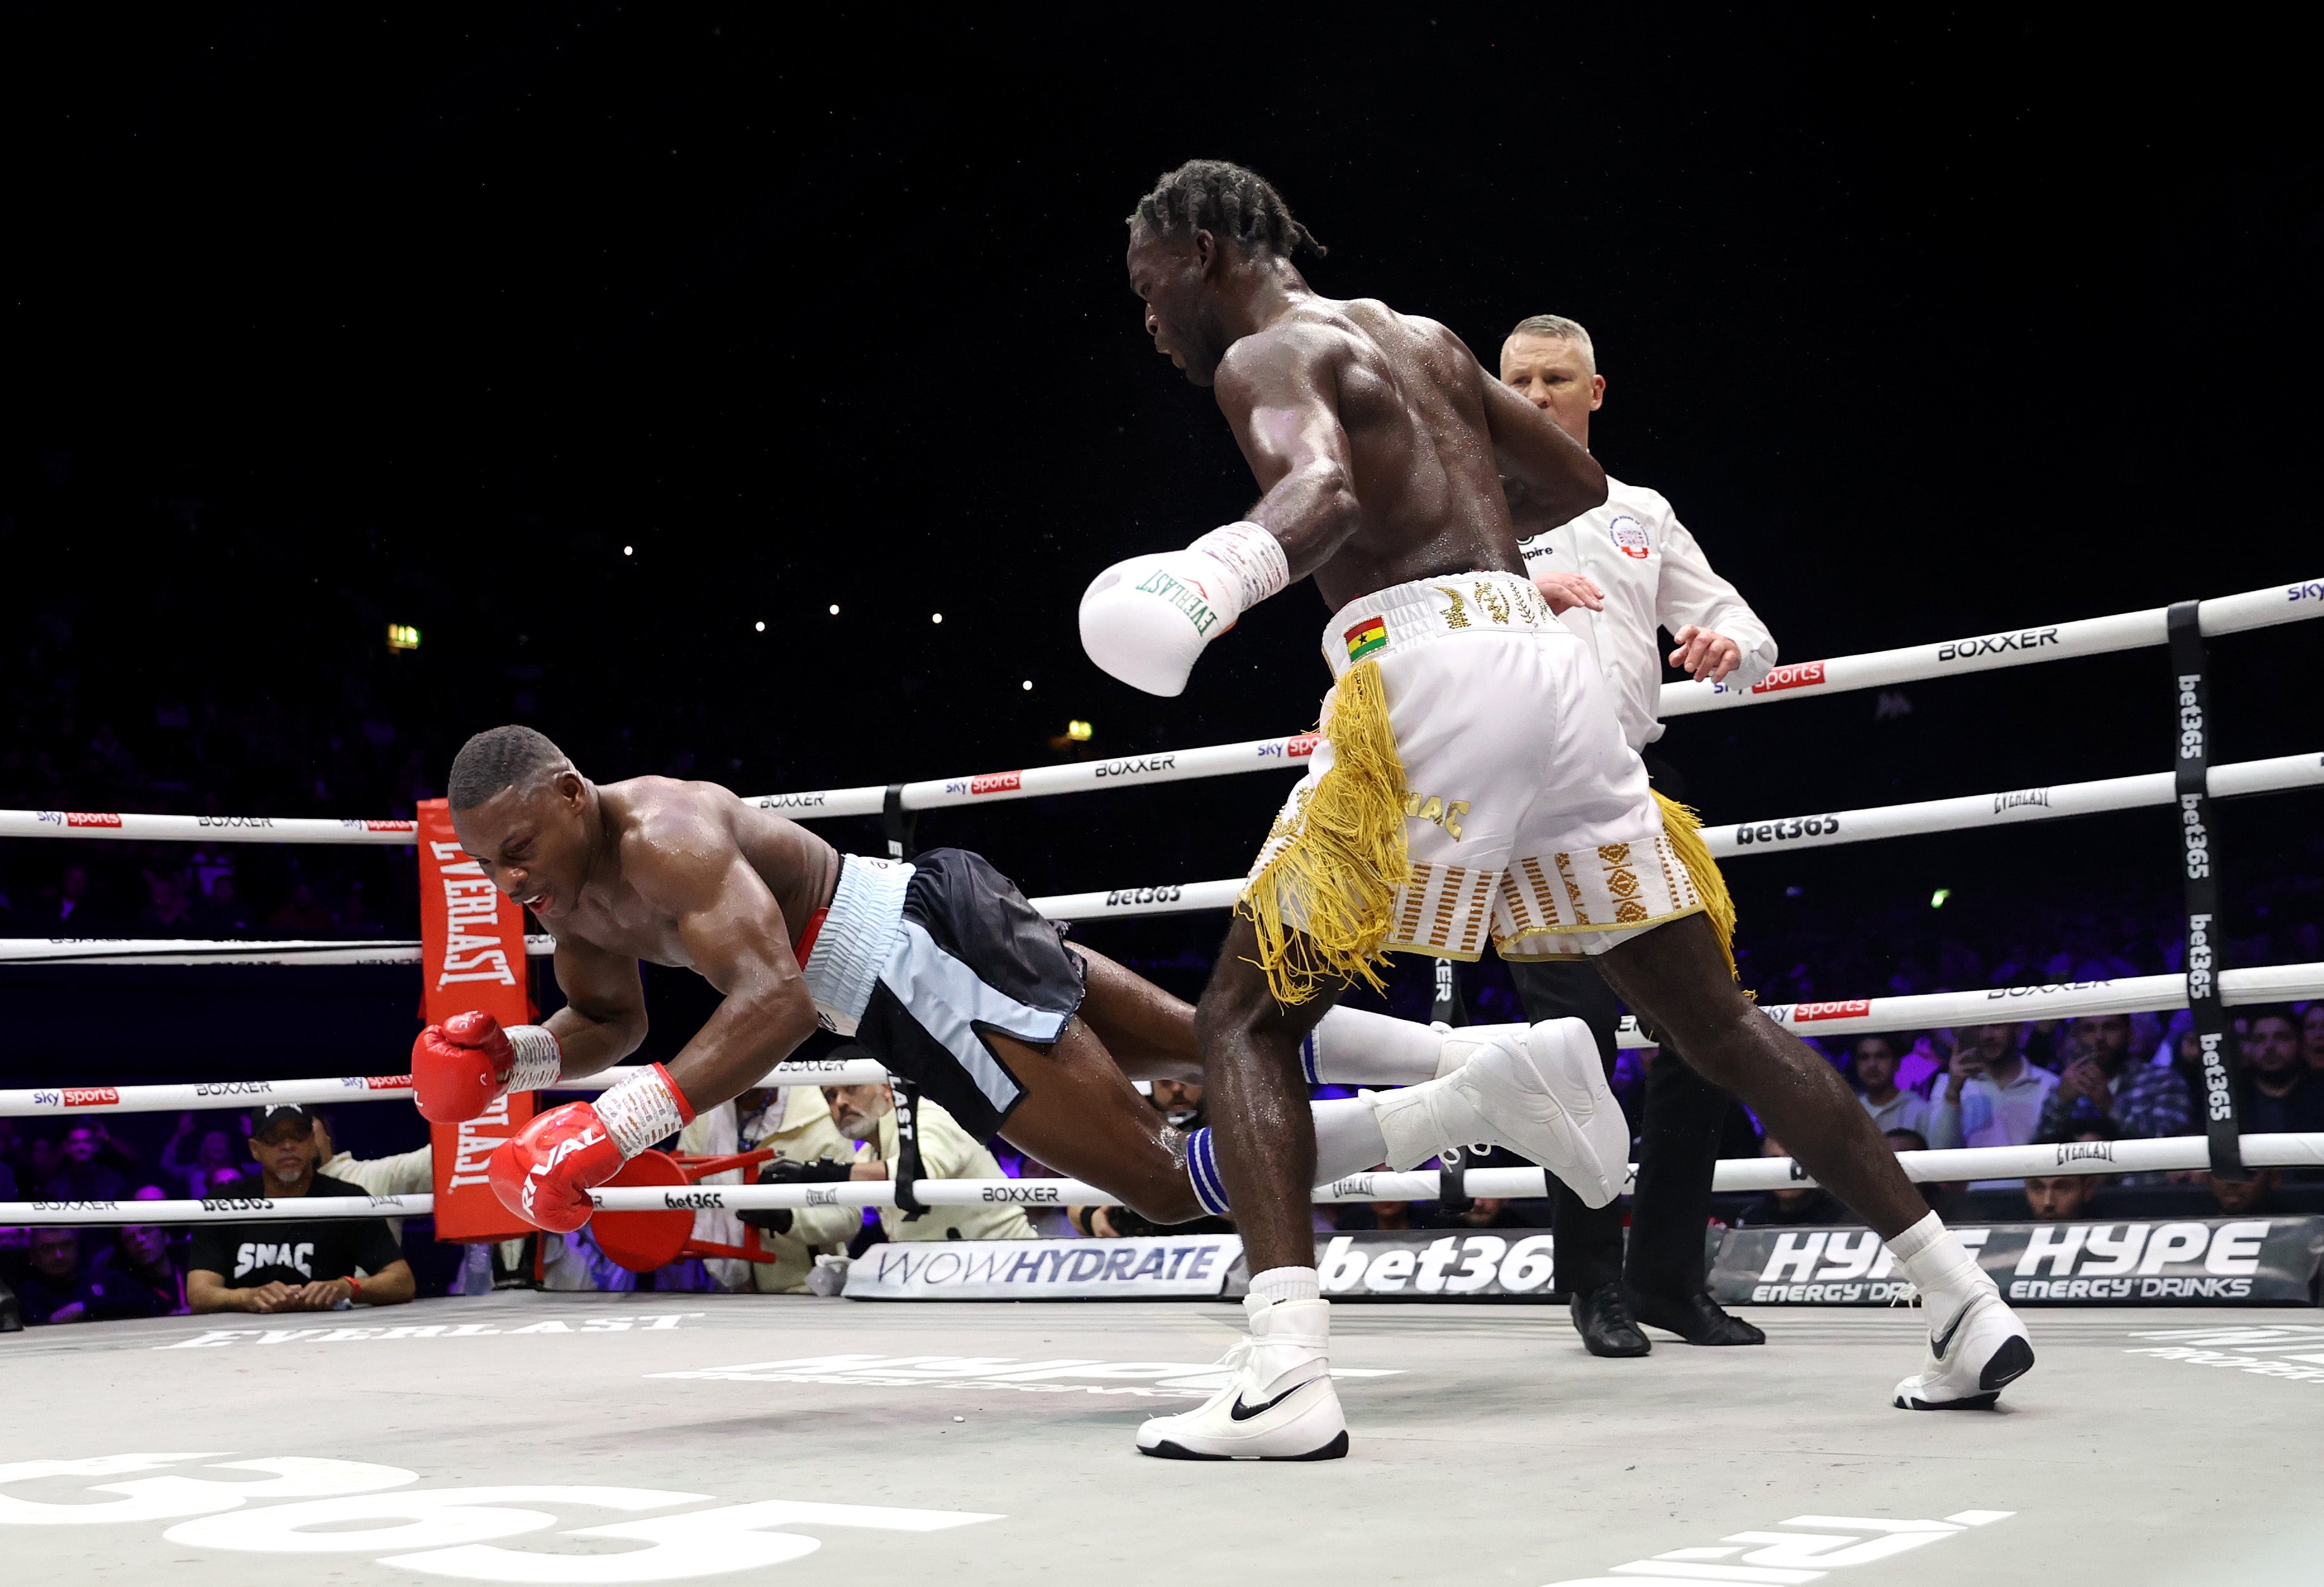 Azeez hit the canvas twice in round 11 but arguably slipped both times